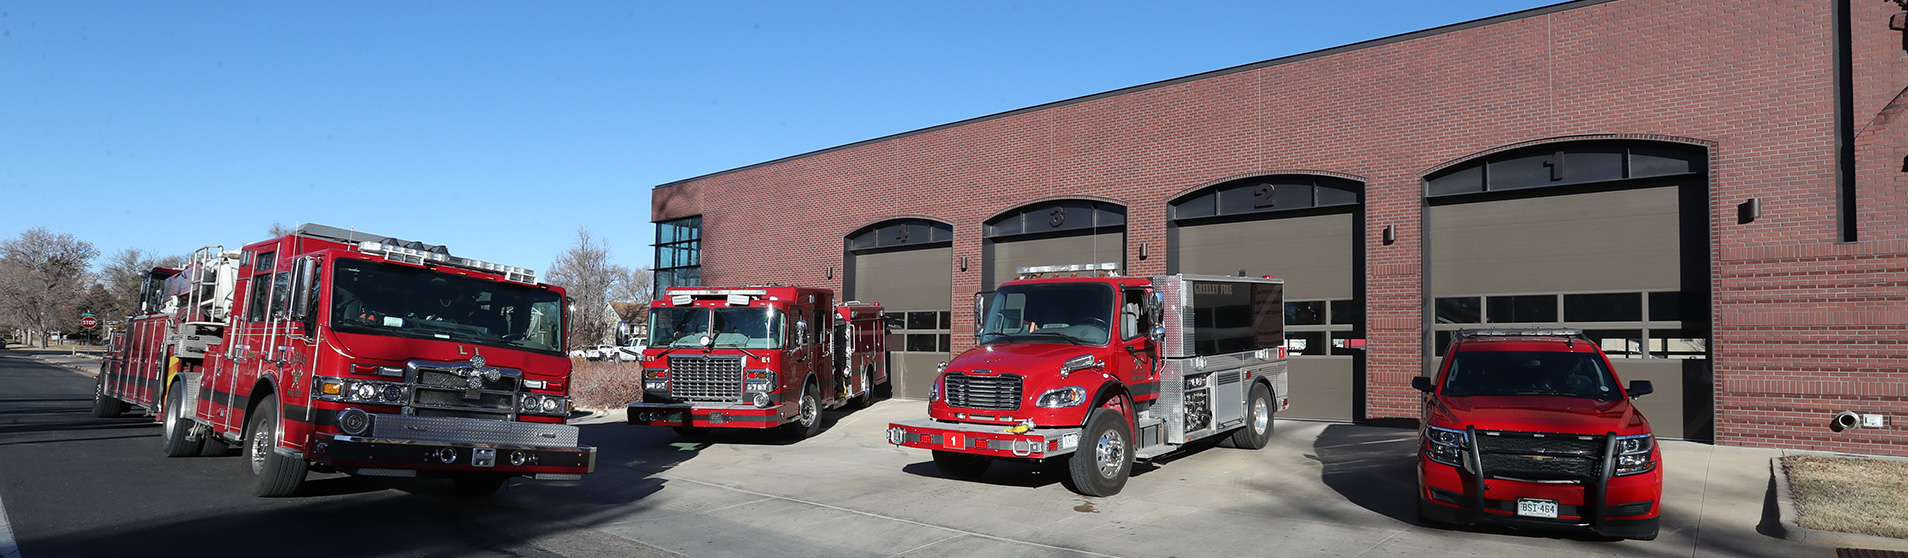 Greeley fire station 1 with emergency vehicles parked in front